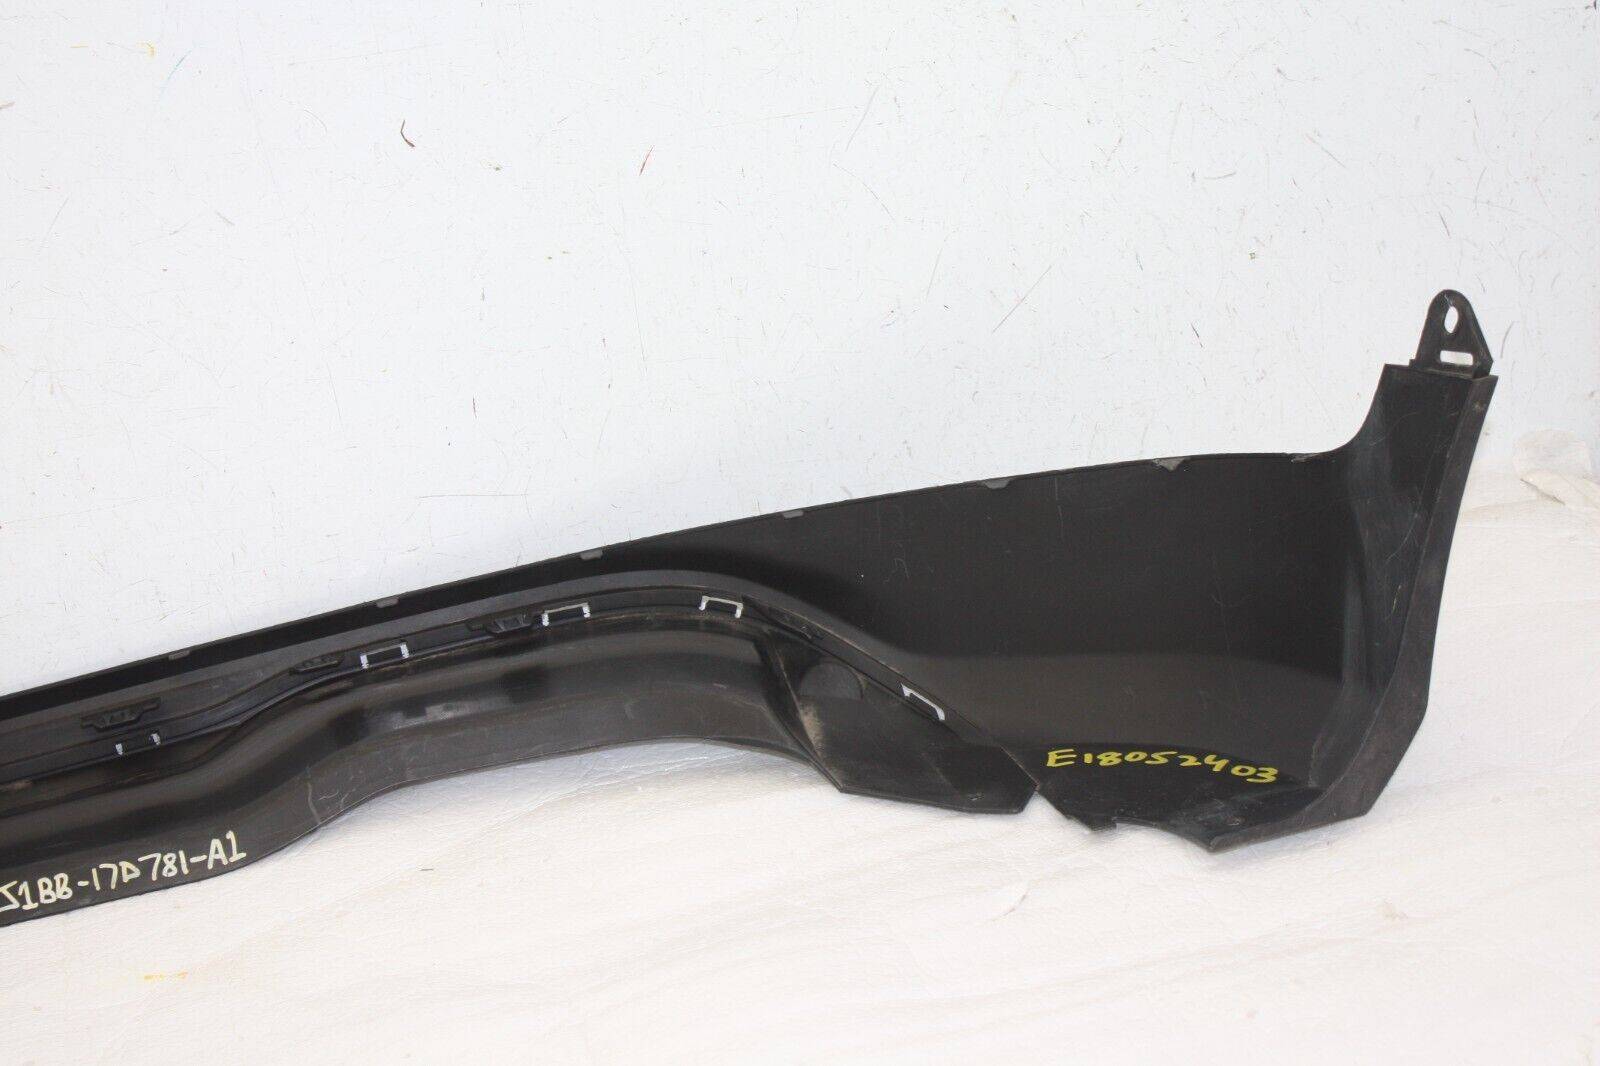 Ford-Fiesta-Active-X-Rear-Bumper-Lower-Section-2018-ON-J1BB-17D781-A1-Genuine-176384480360-15